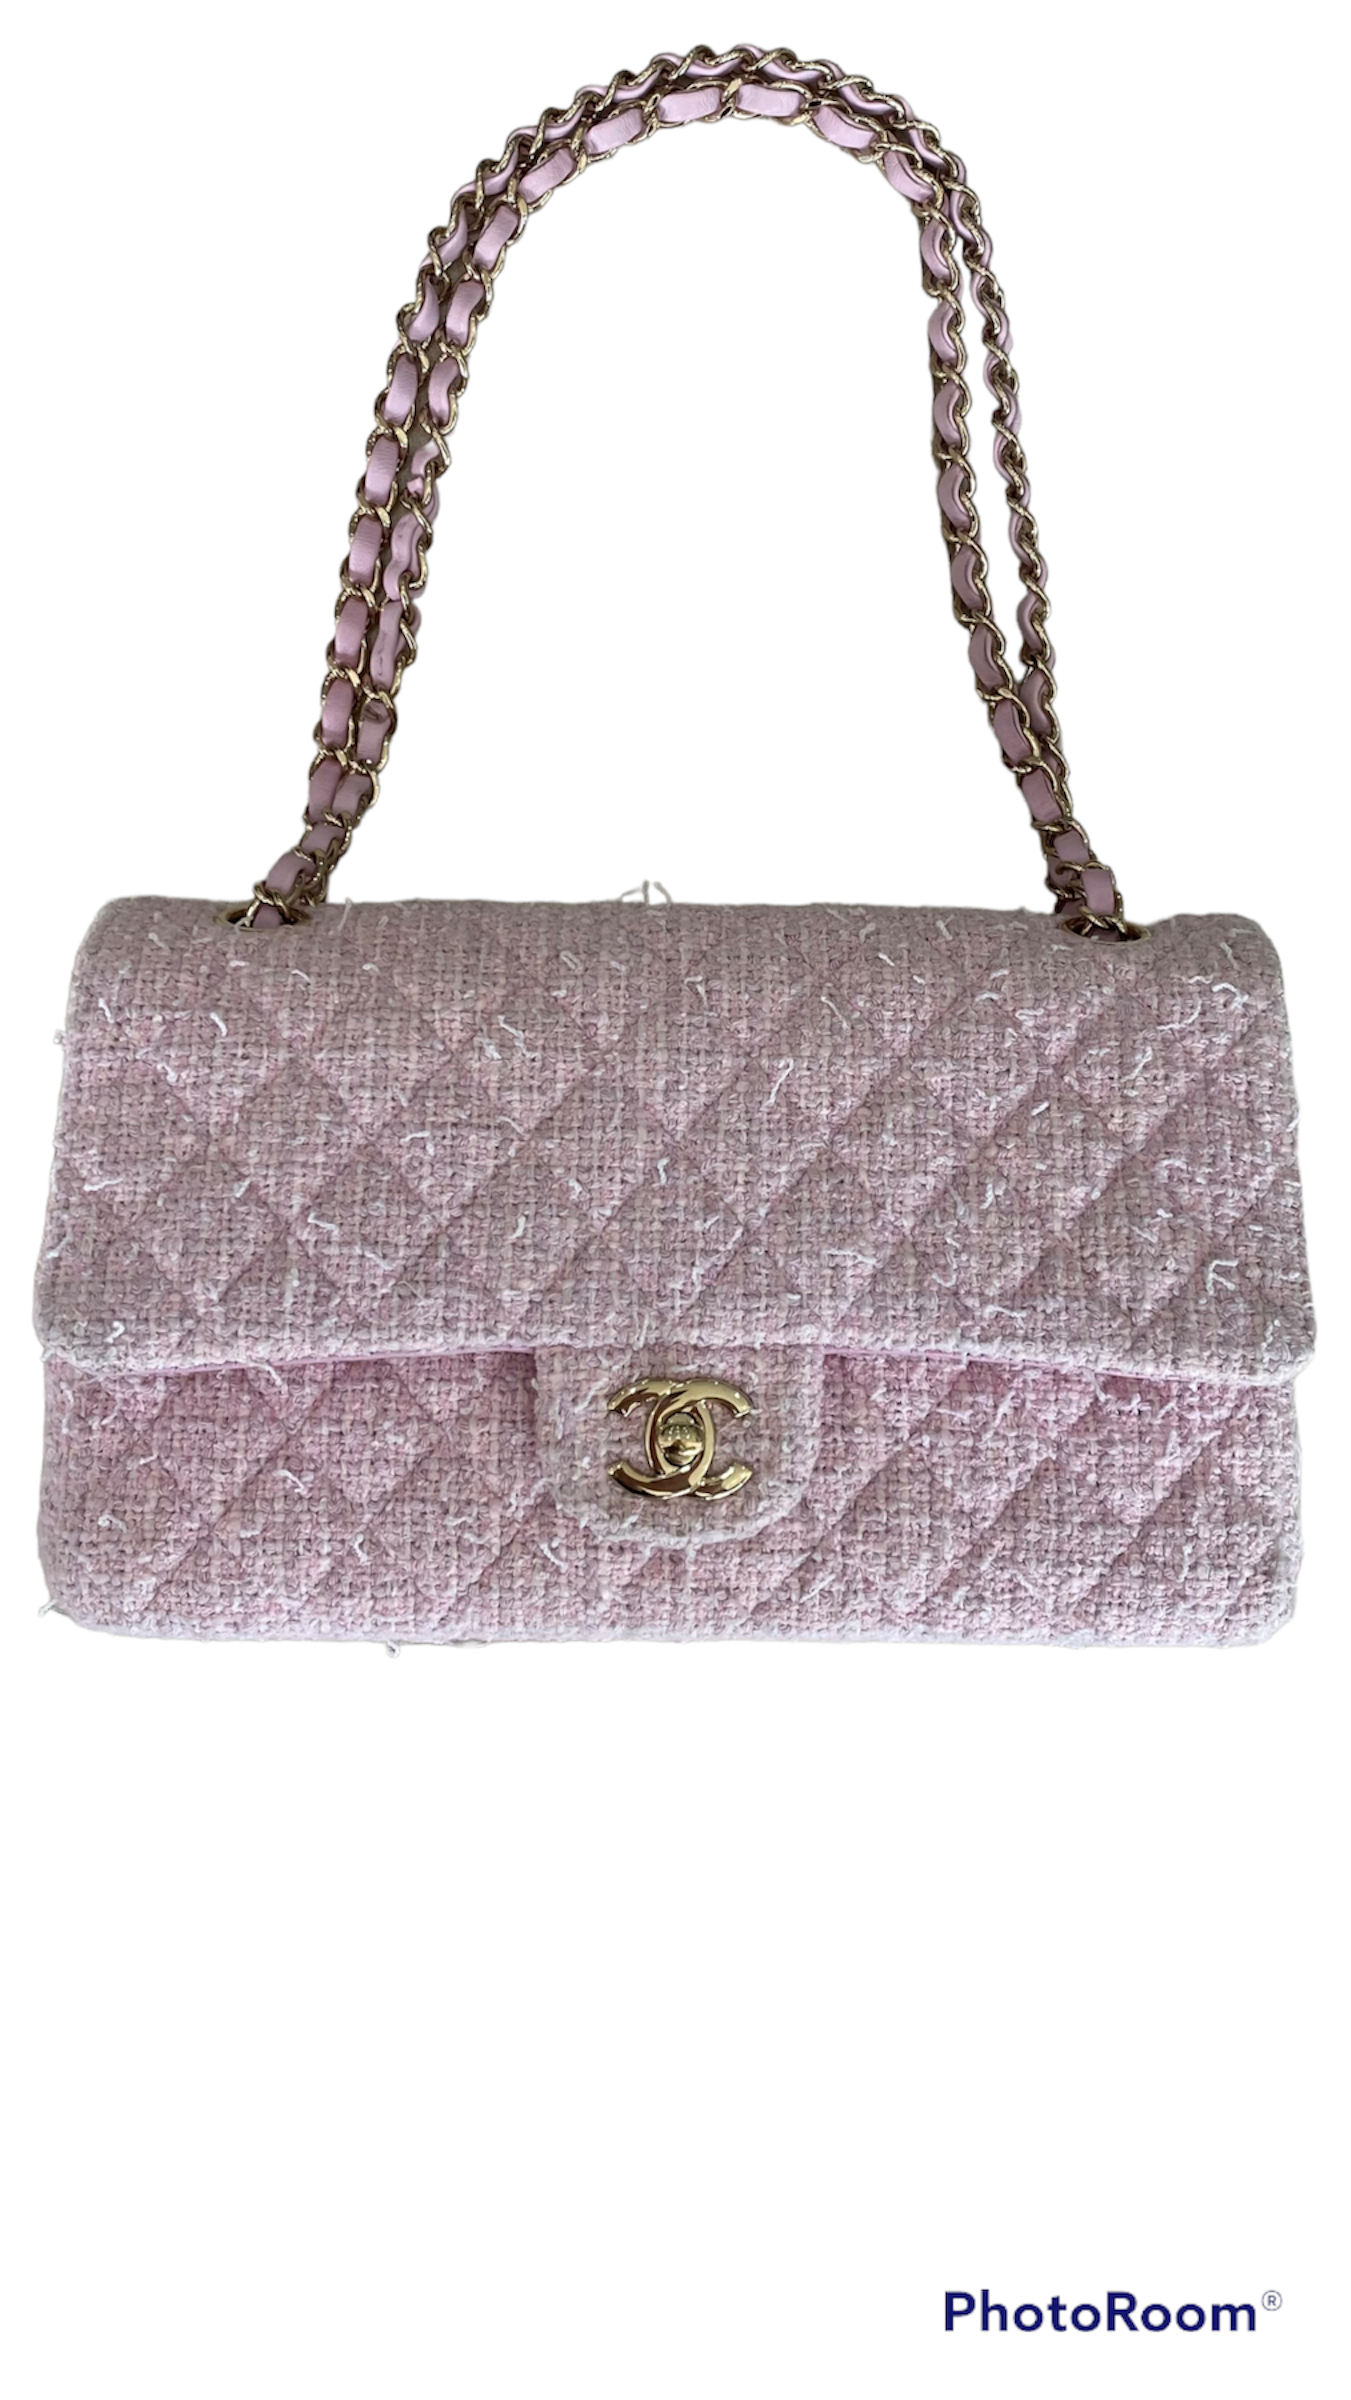 Chanel Limited Edition Pink Bag